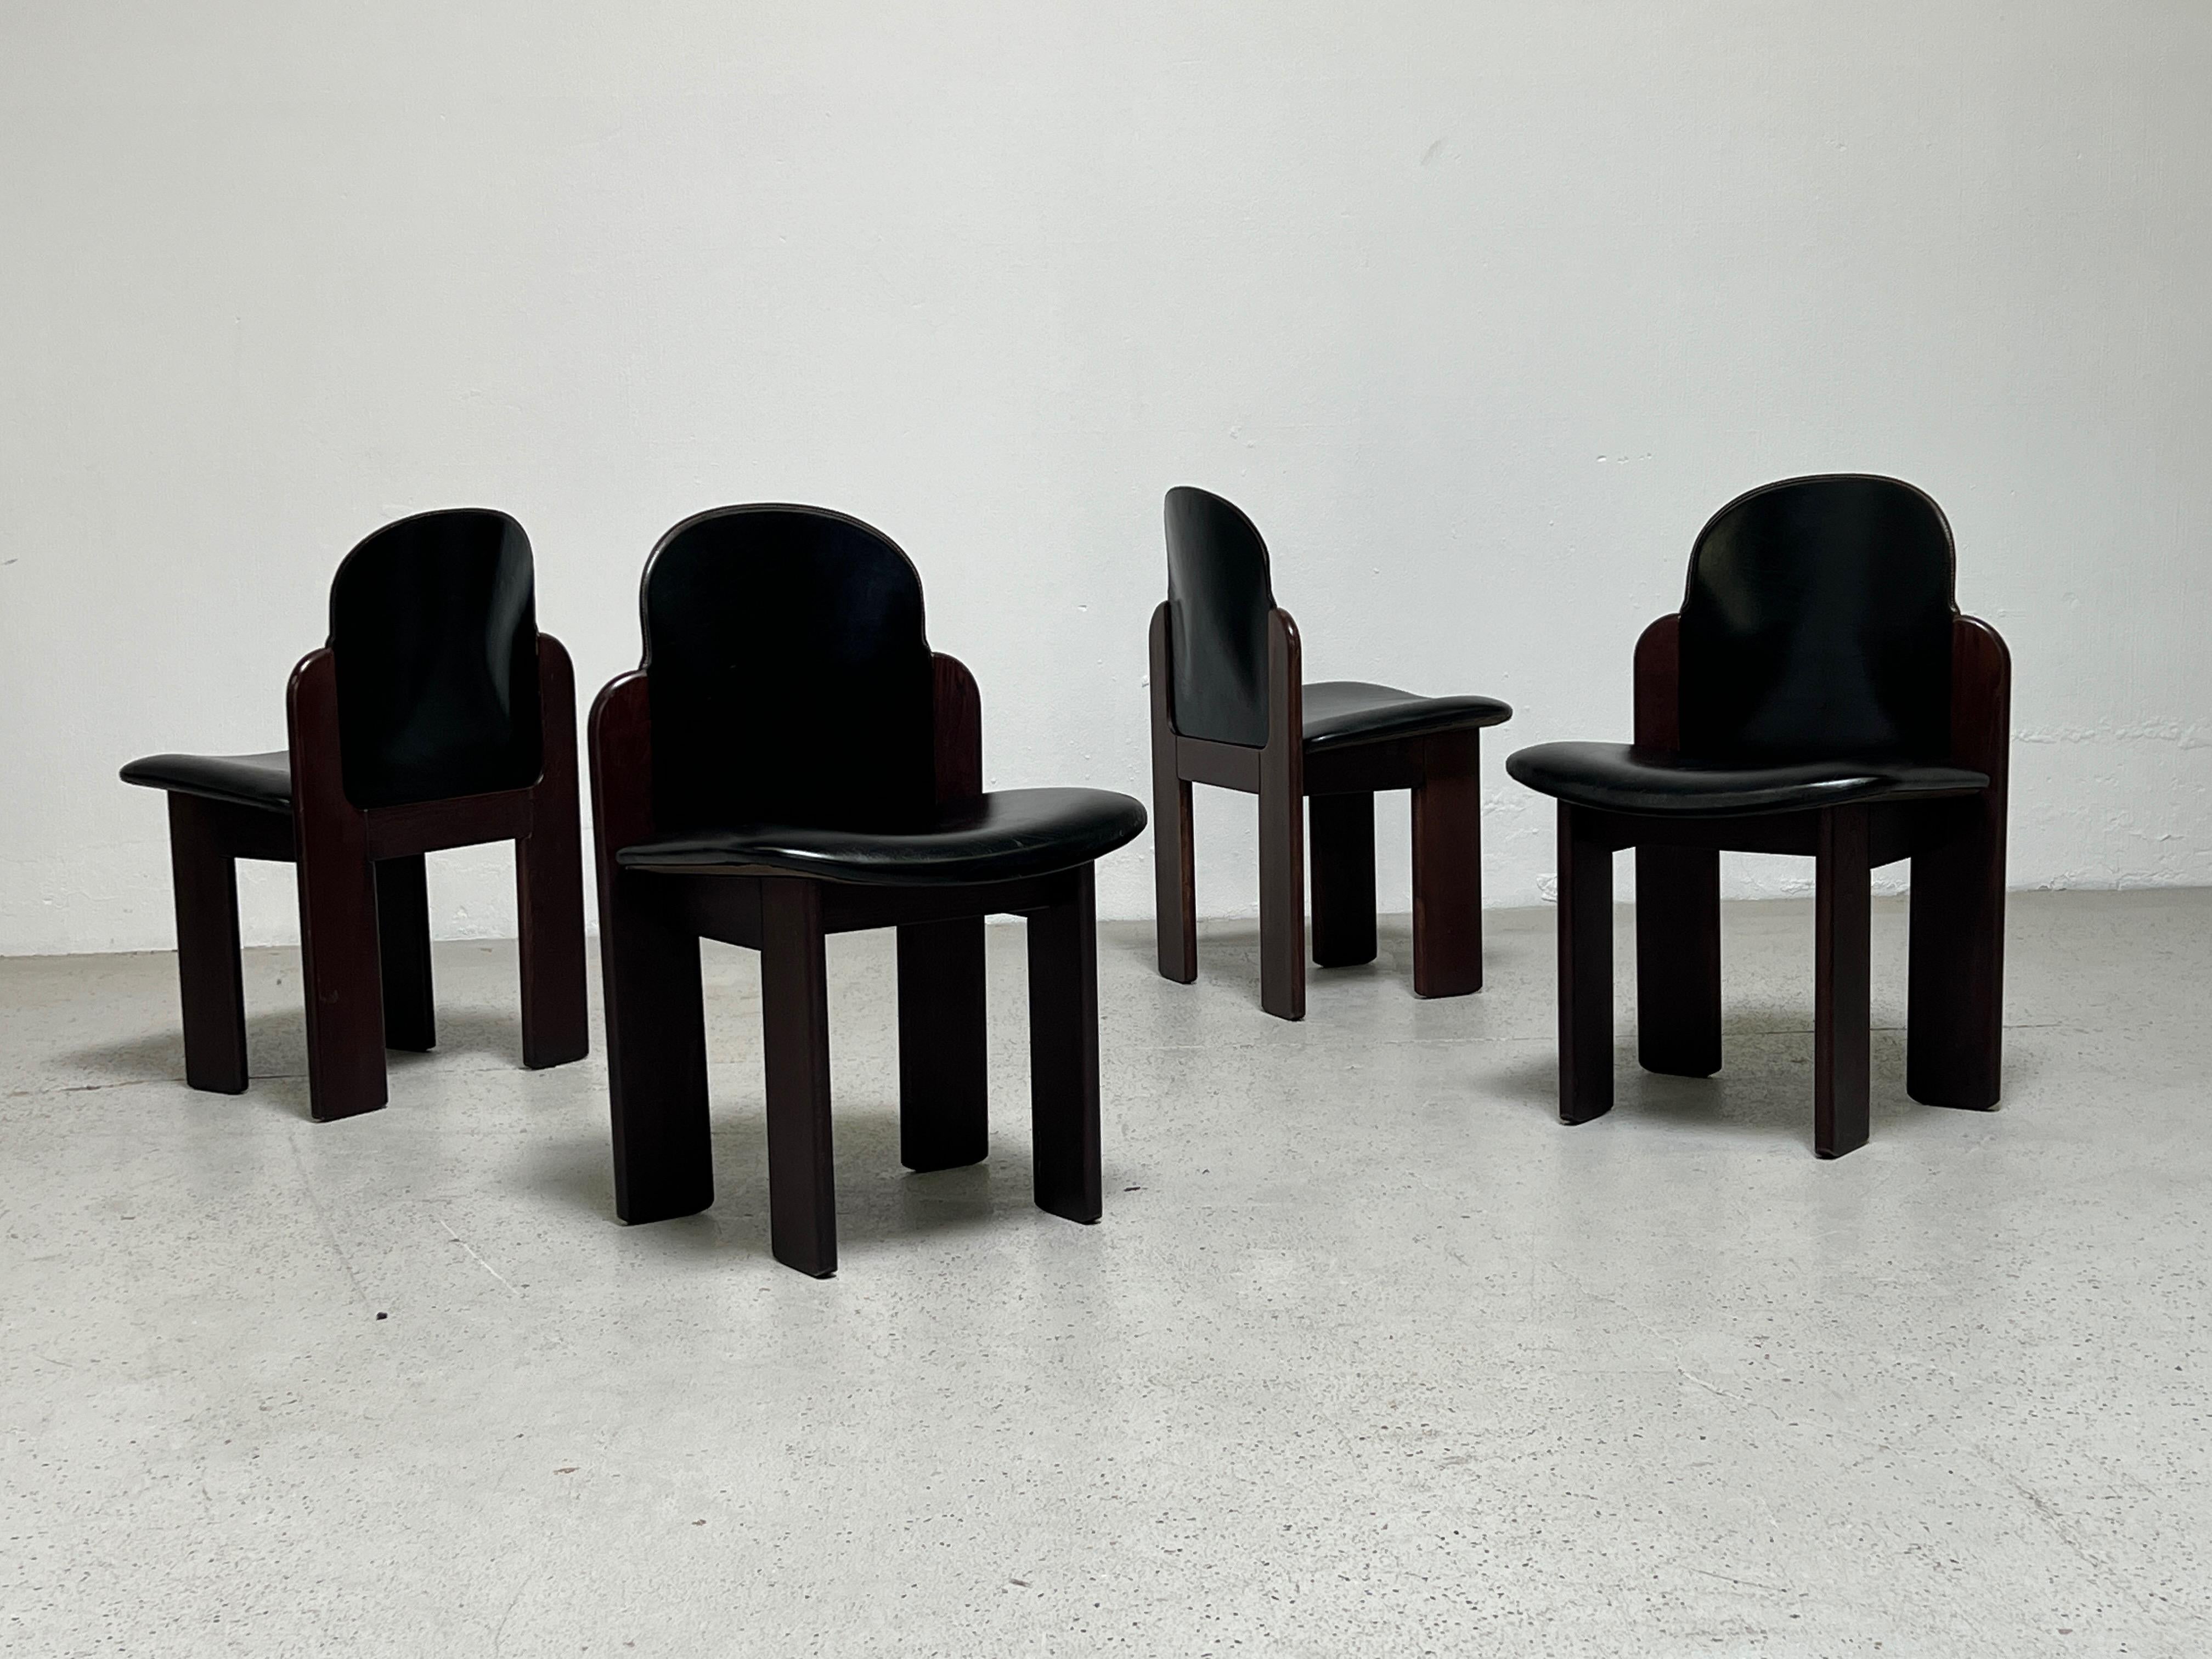 A set of four walnut and black leather chairs designed by Silvio Coppola for Bernini.